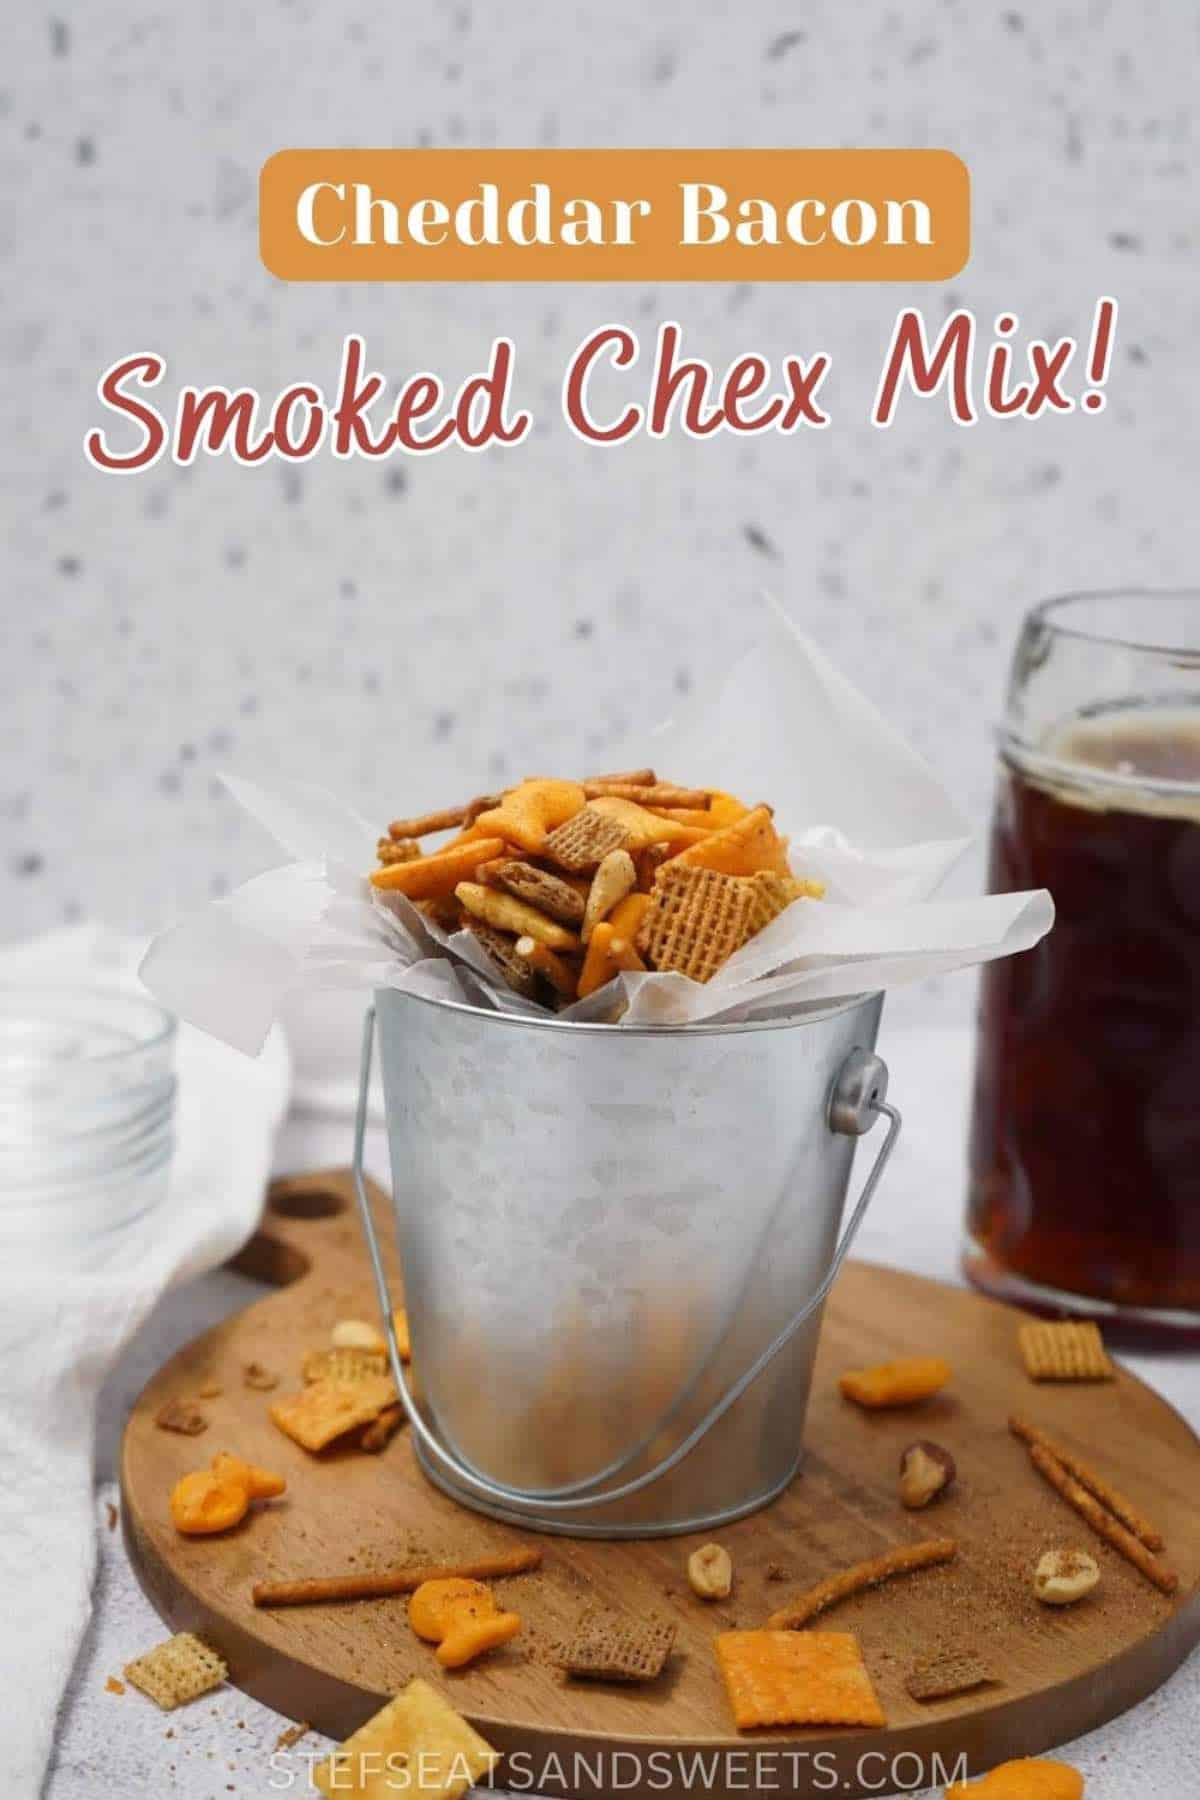 Cheddar Bacon Smoked Chex Mix with Text